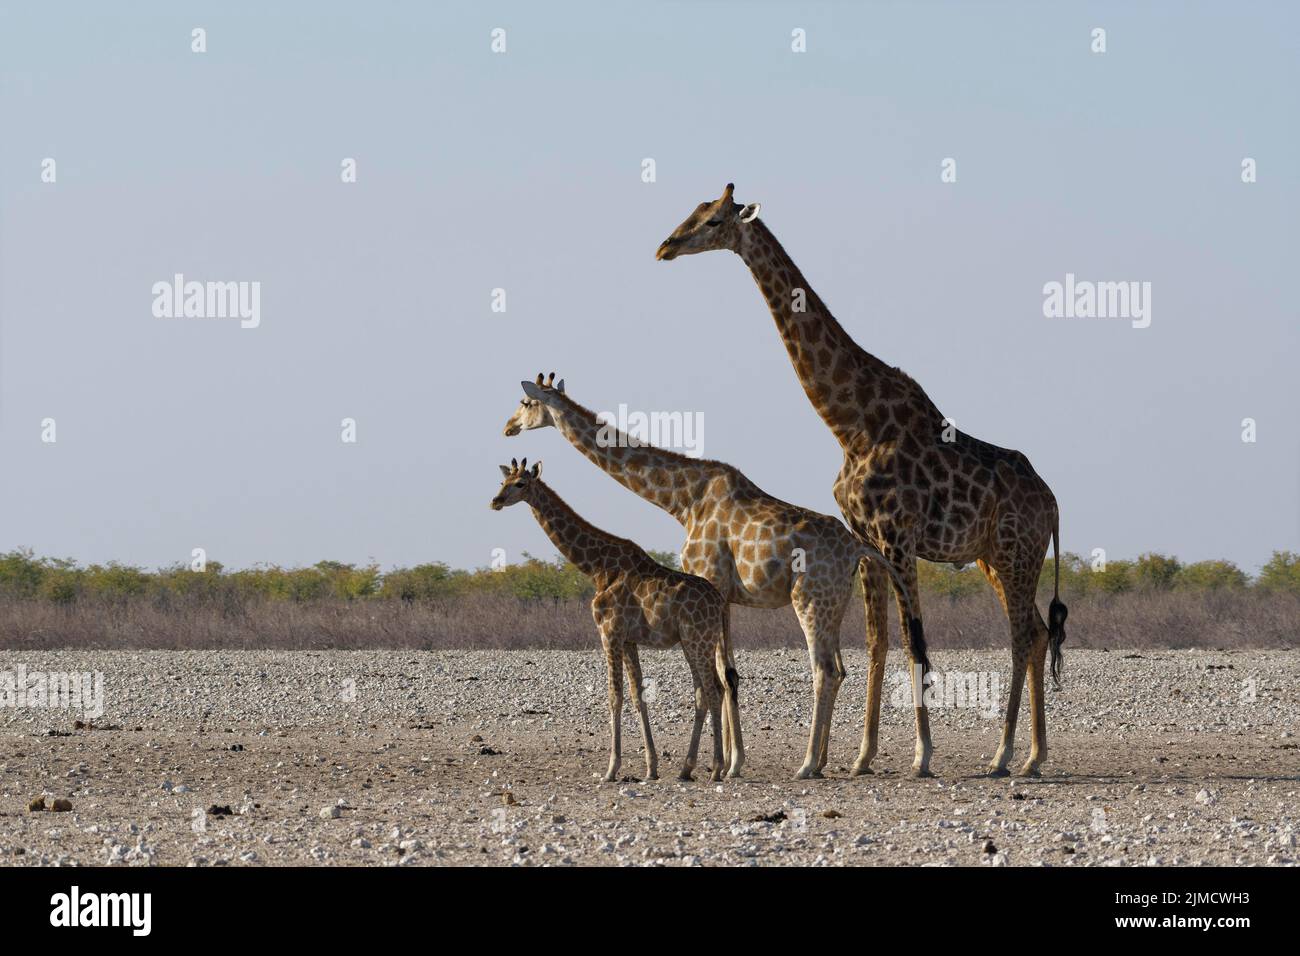 Angolan giraffes (Giraffa camelopardalis angolensis), adult male with young female and foal, on arid ground, alert, Etosha National Park, Namibia, Afr Stock Photo